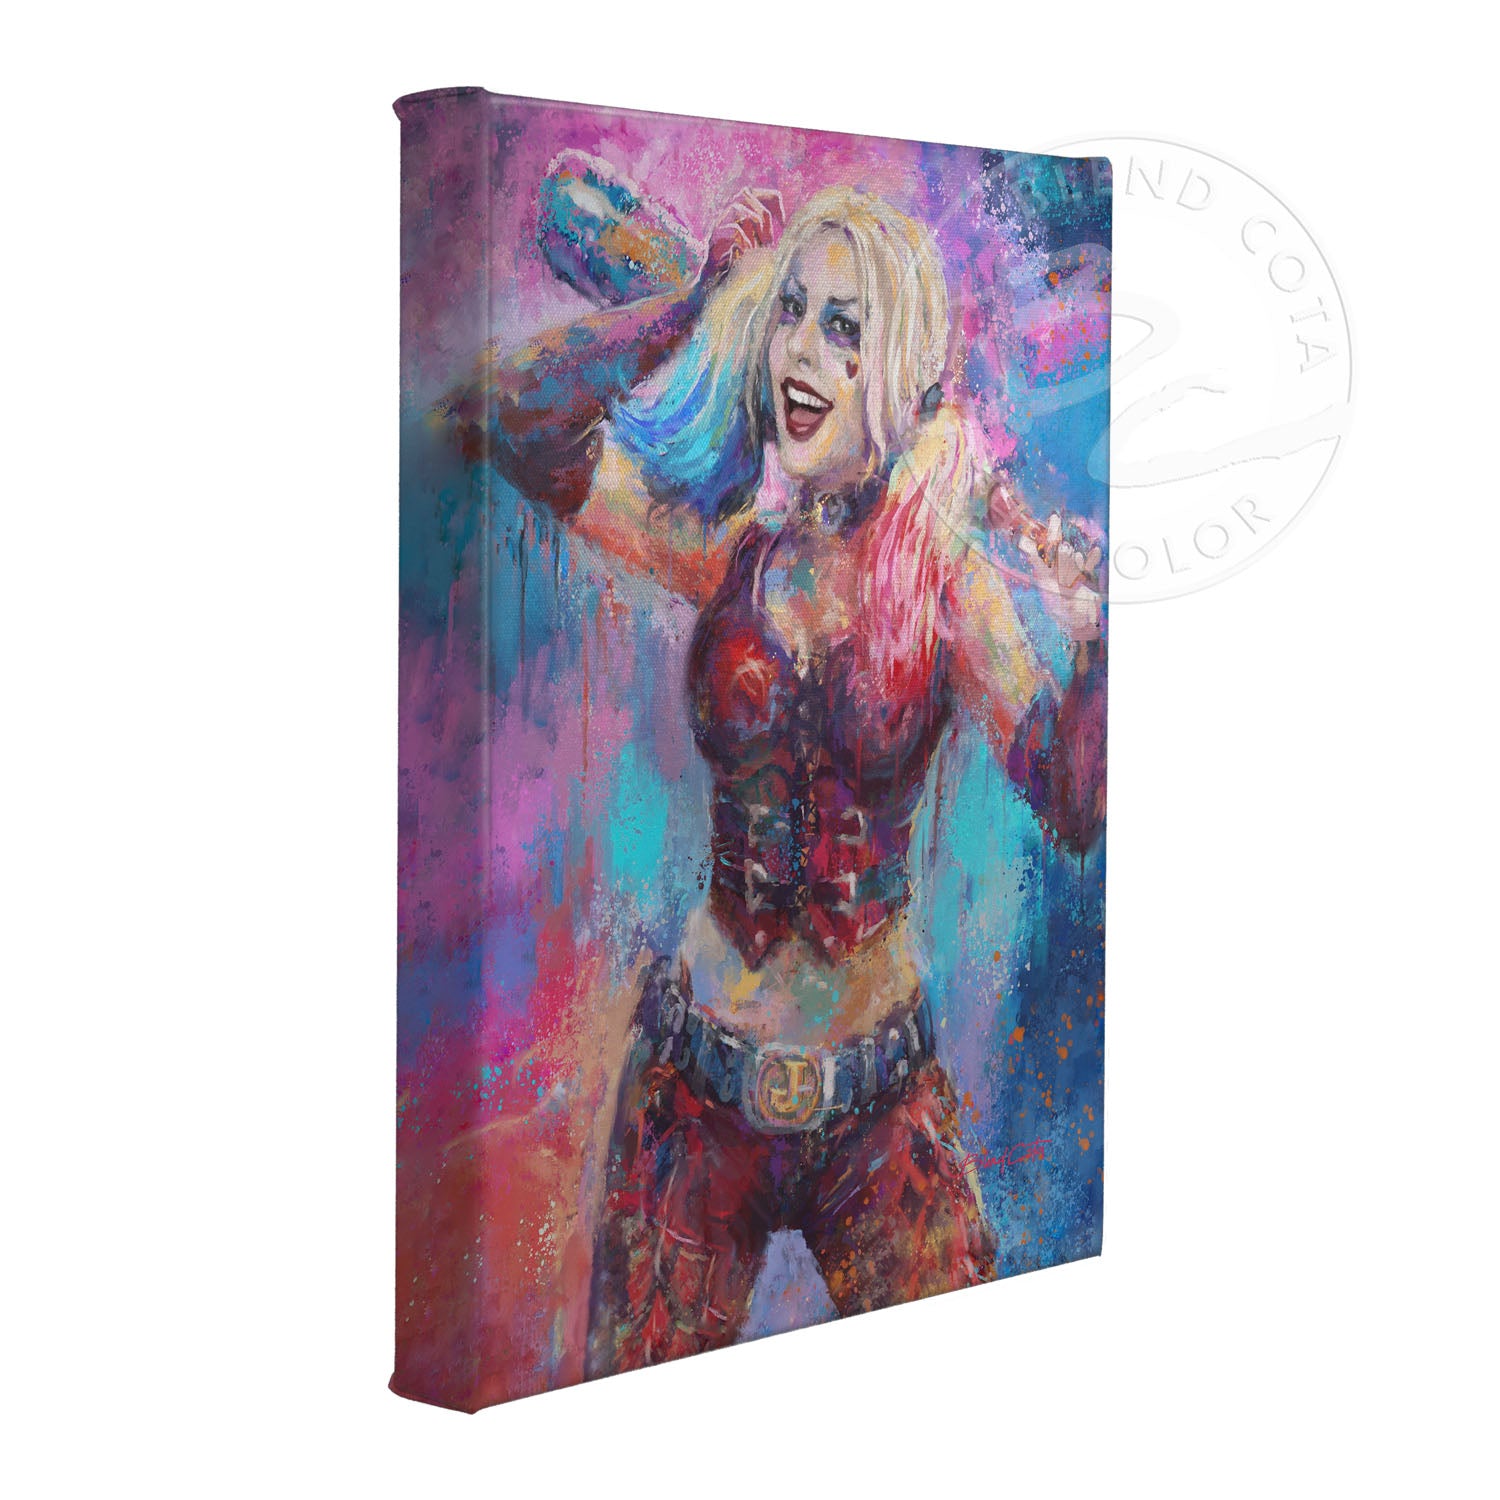 Harley Quinn is s flamboyant super-villain and an adversary of Batman and is the Joker's sidekick. Gallery Wrap